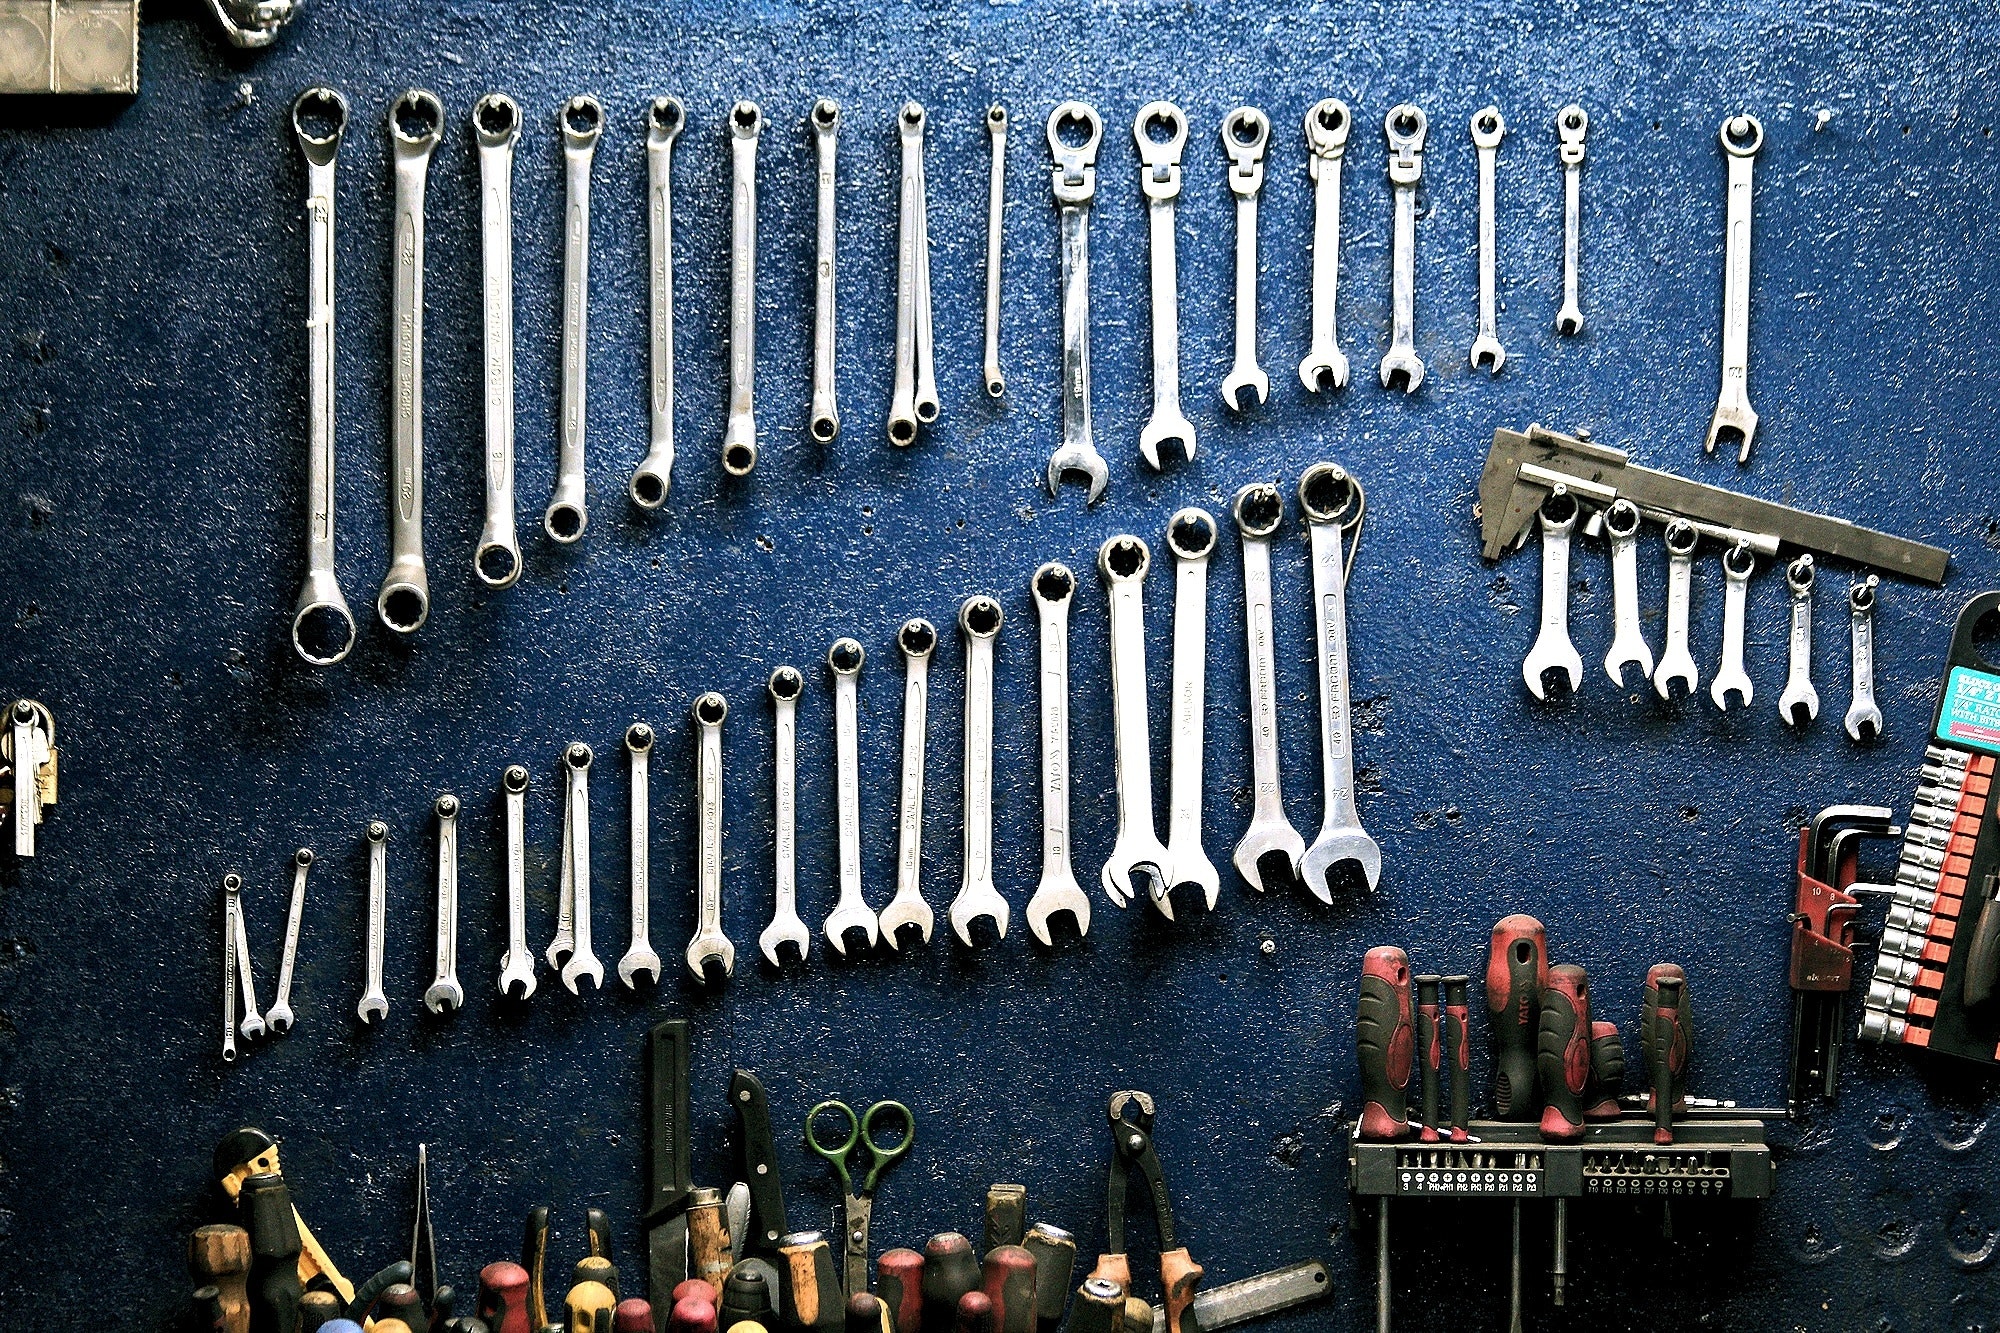 Best Uses for Your Garage to Maximise Storage Space